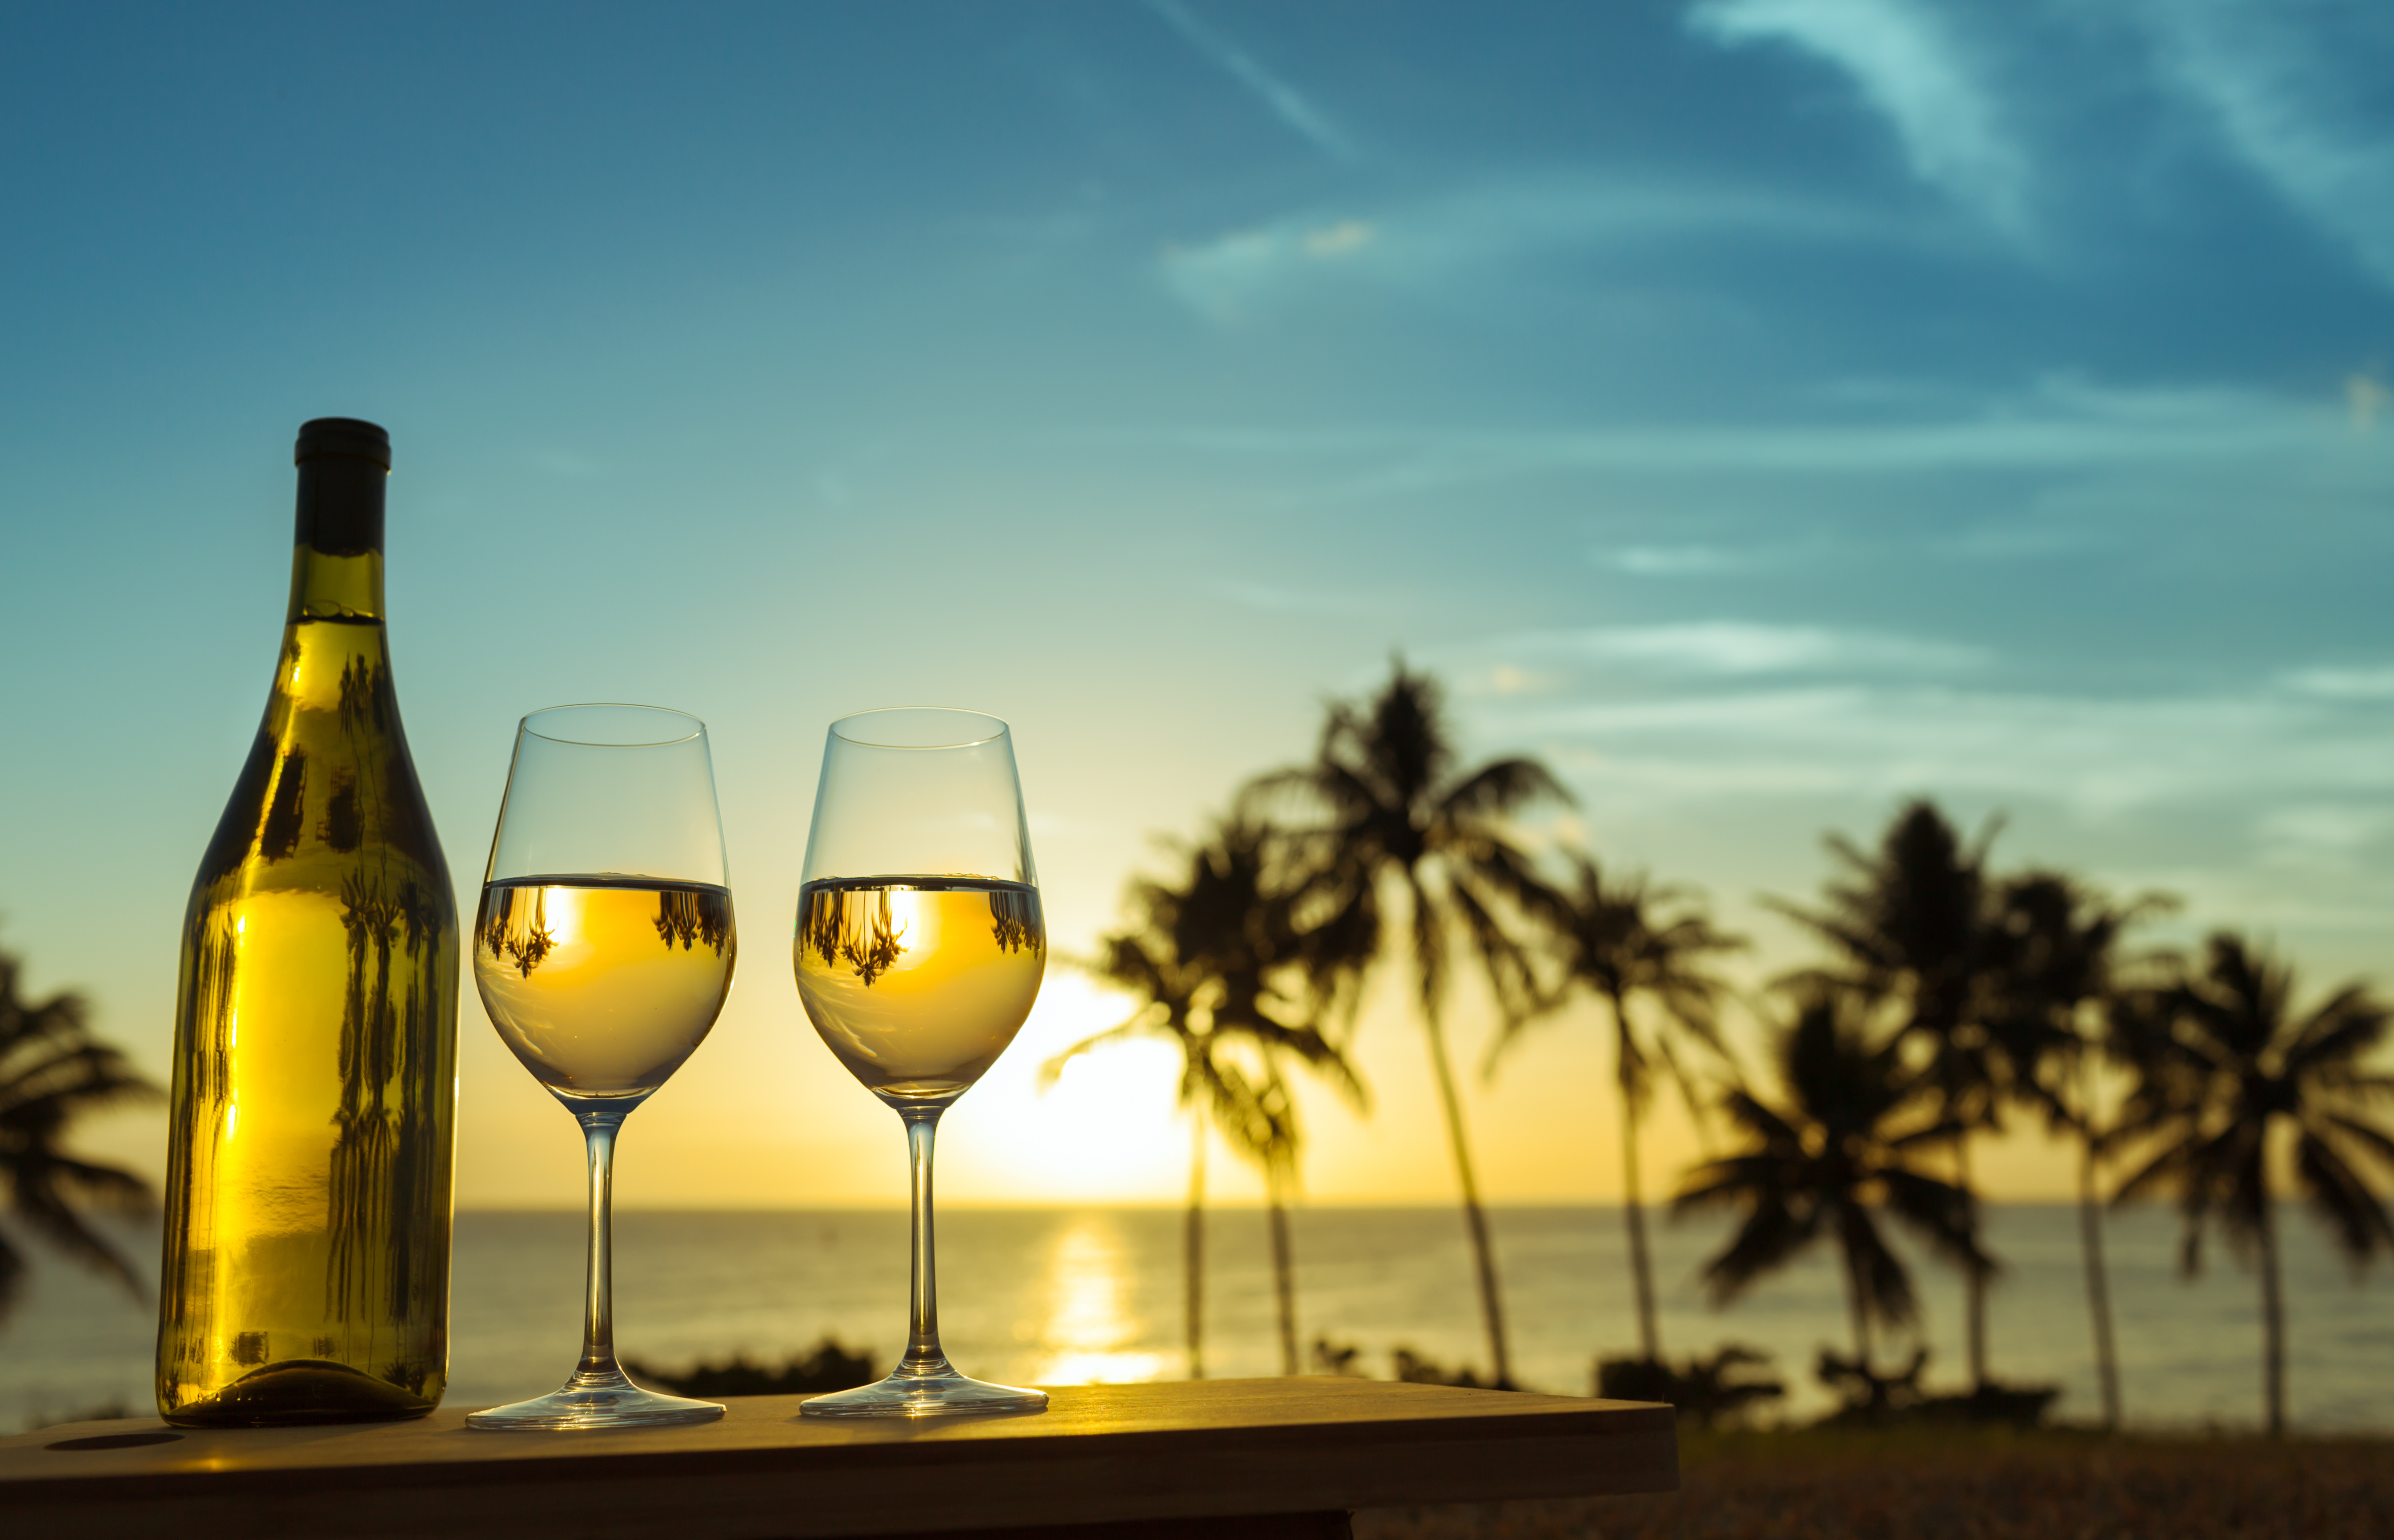 Hawaiian white wine bottle and glasses with palm trees and sunset